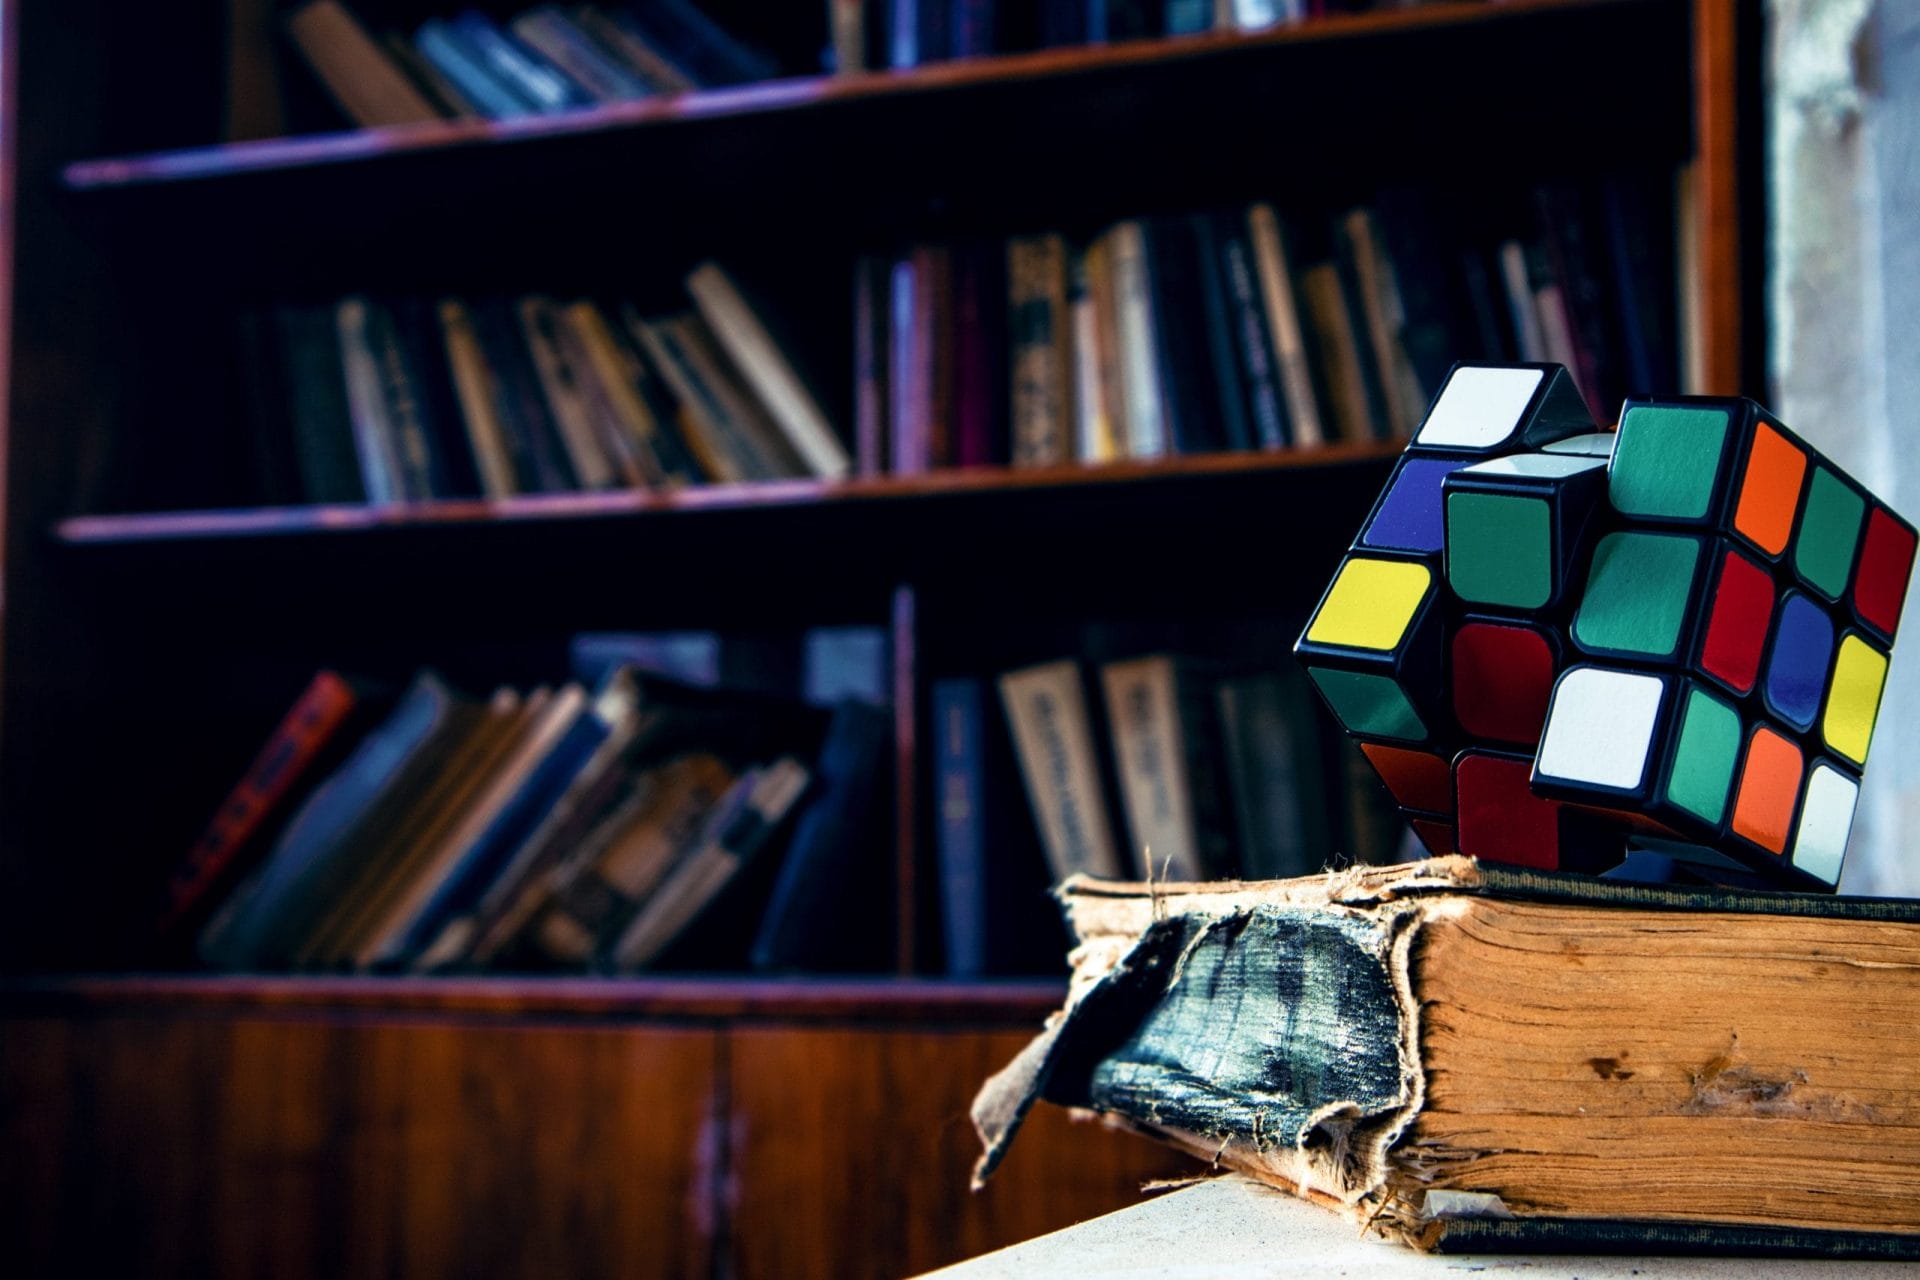 Rubix cube puzzle on top of old book